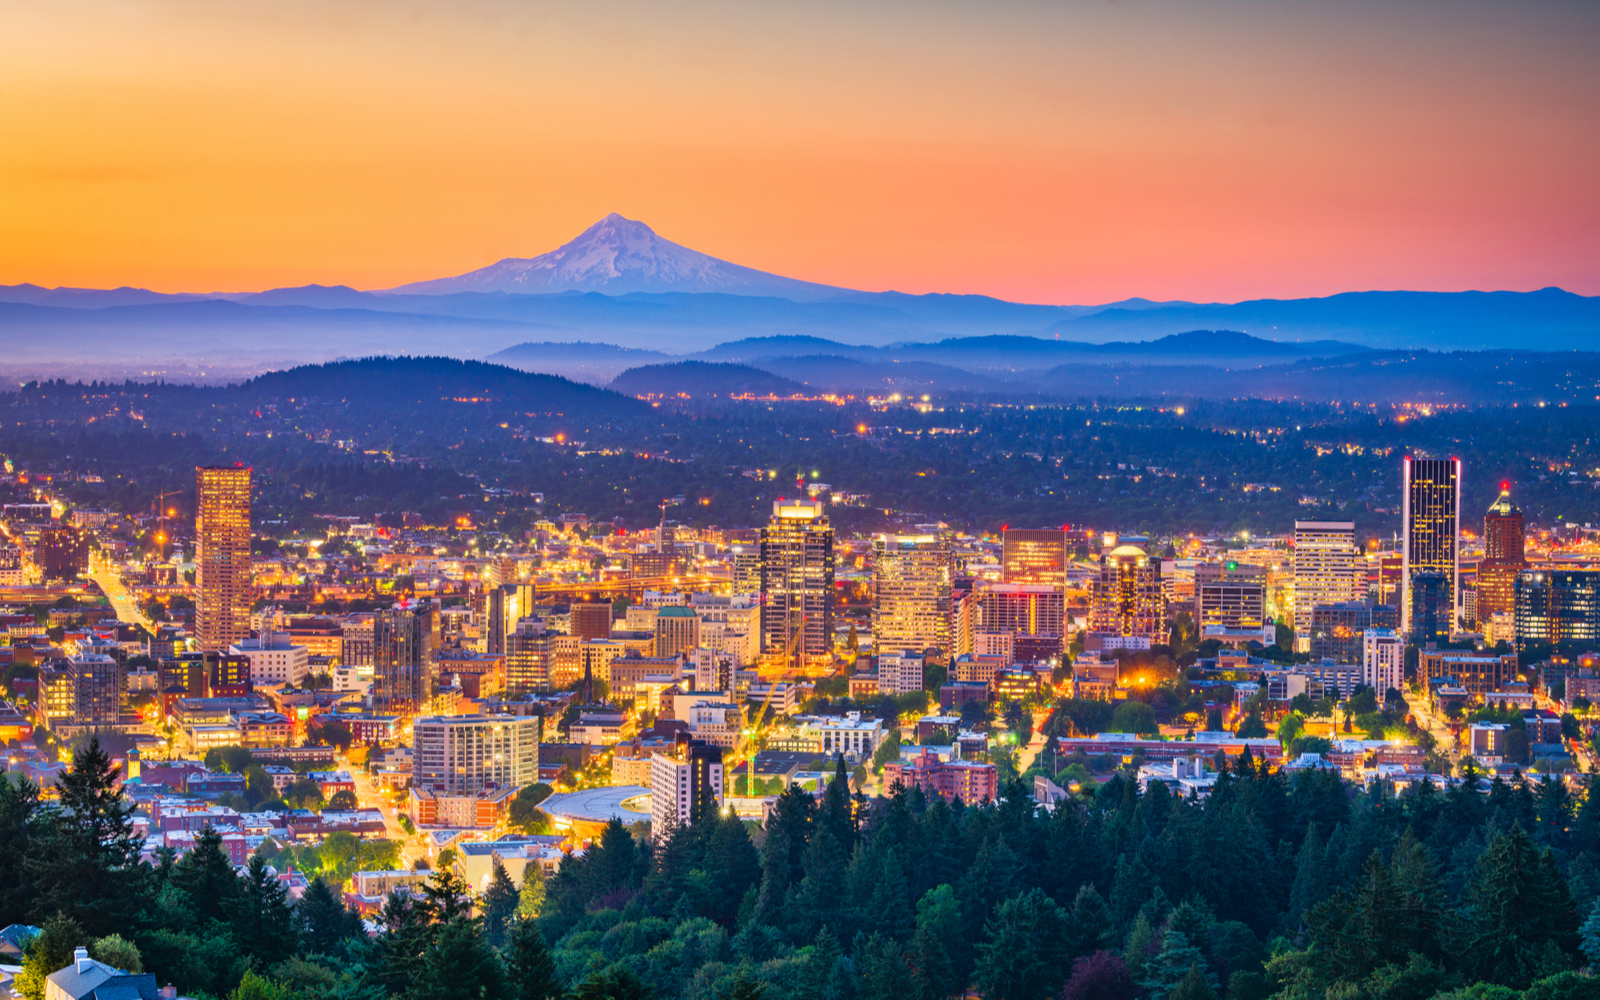 Skyline of Portland at dusk during the best time to visit Oregon with the city lighted up below